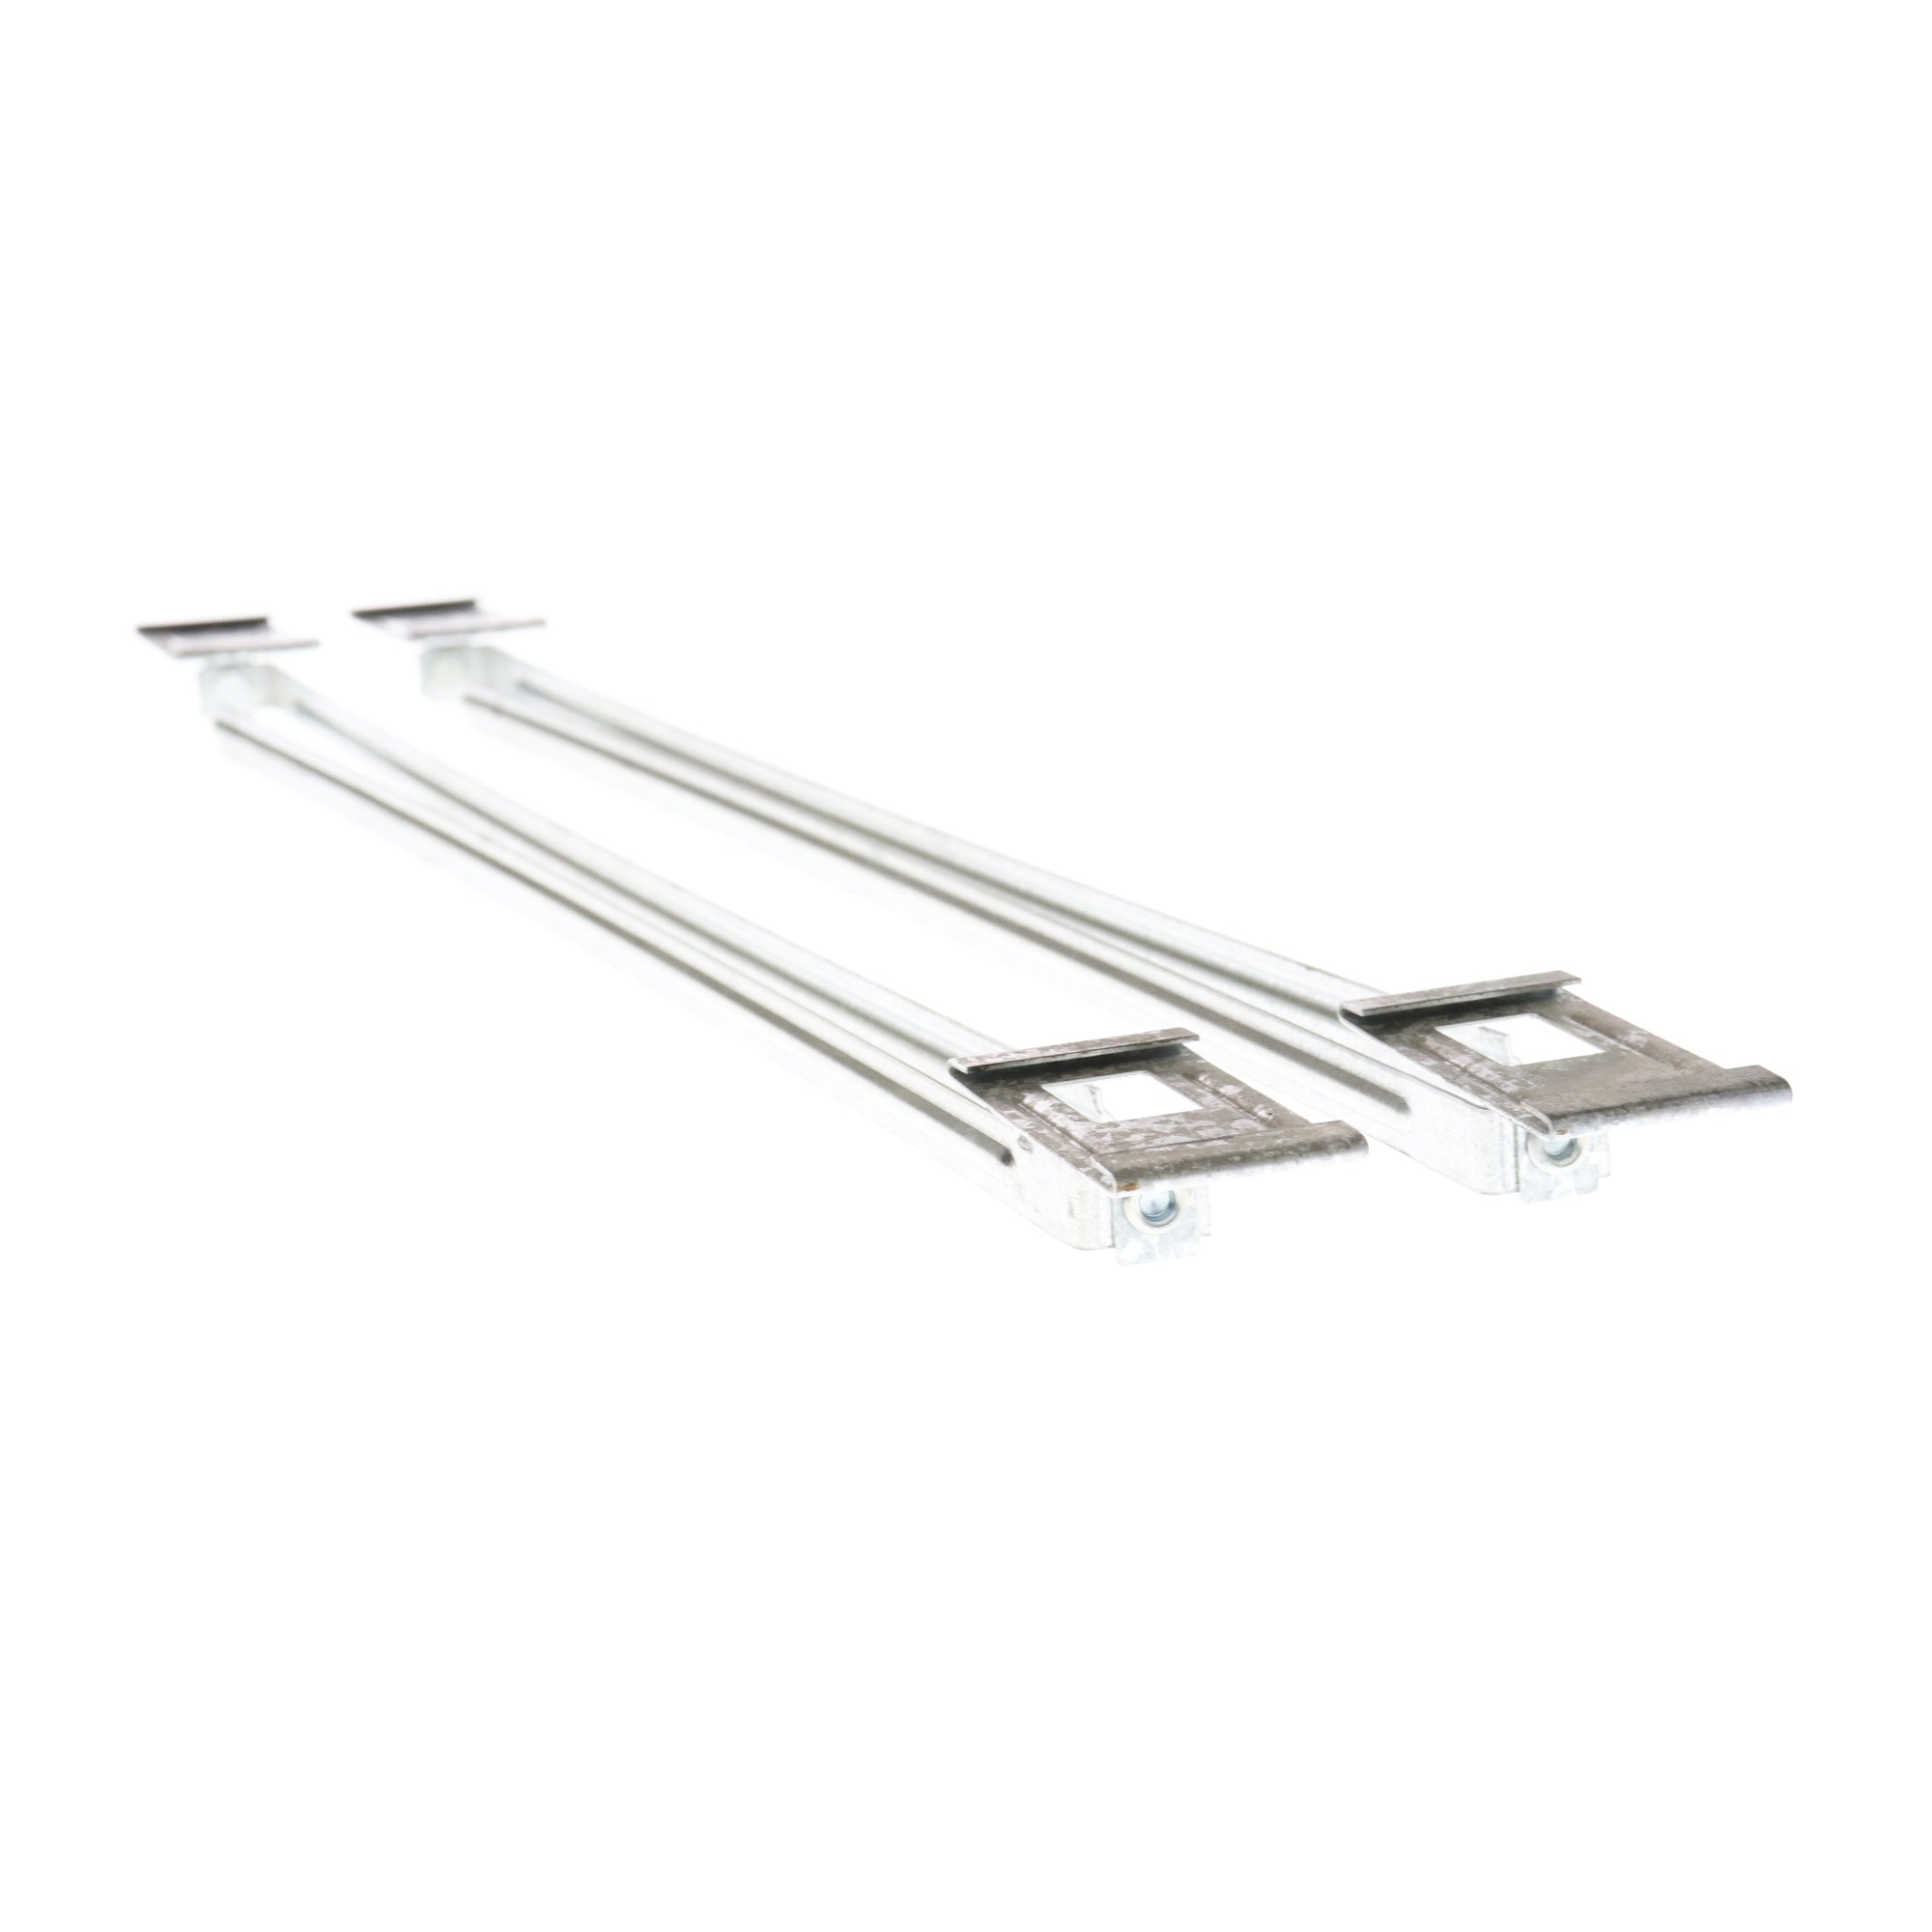 Erico Caddy Cadwal, CADDY ERICO 517FCB HAT CHANNEL LIGHT FIXTURE SUSPENSION BAR, (5-PACK)